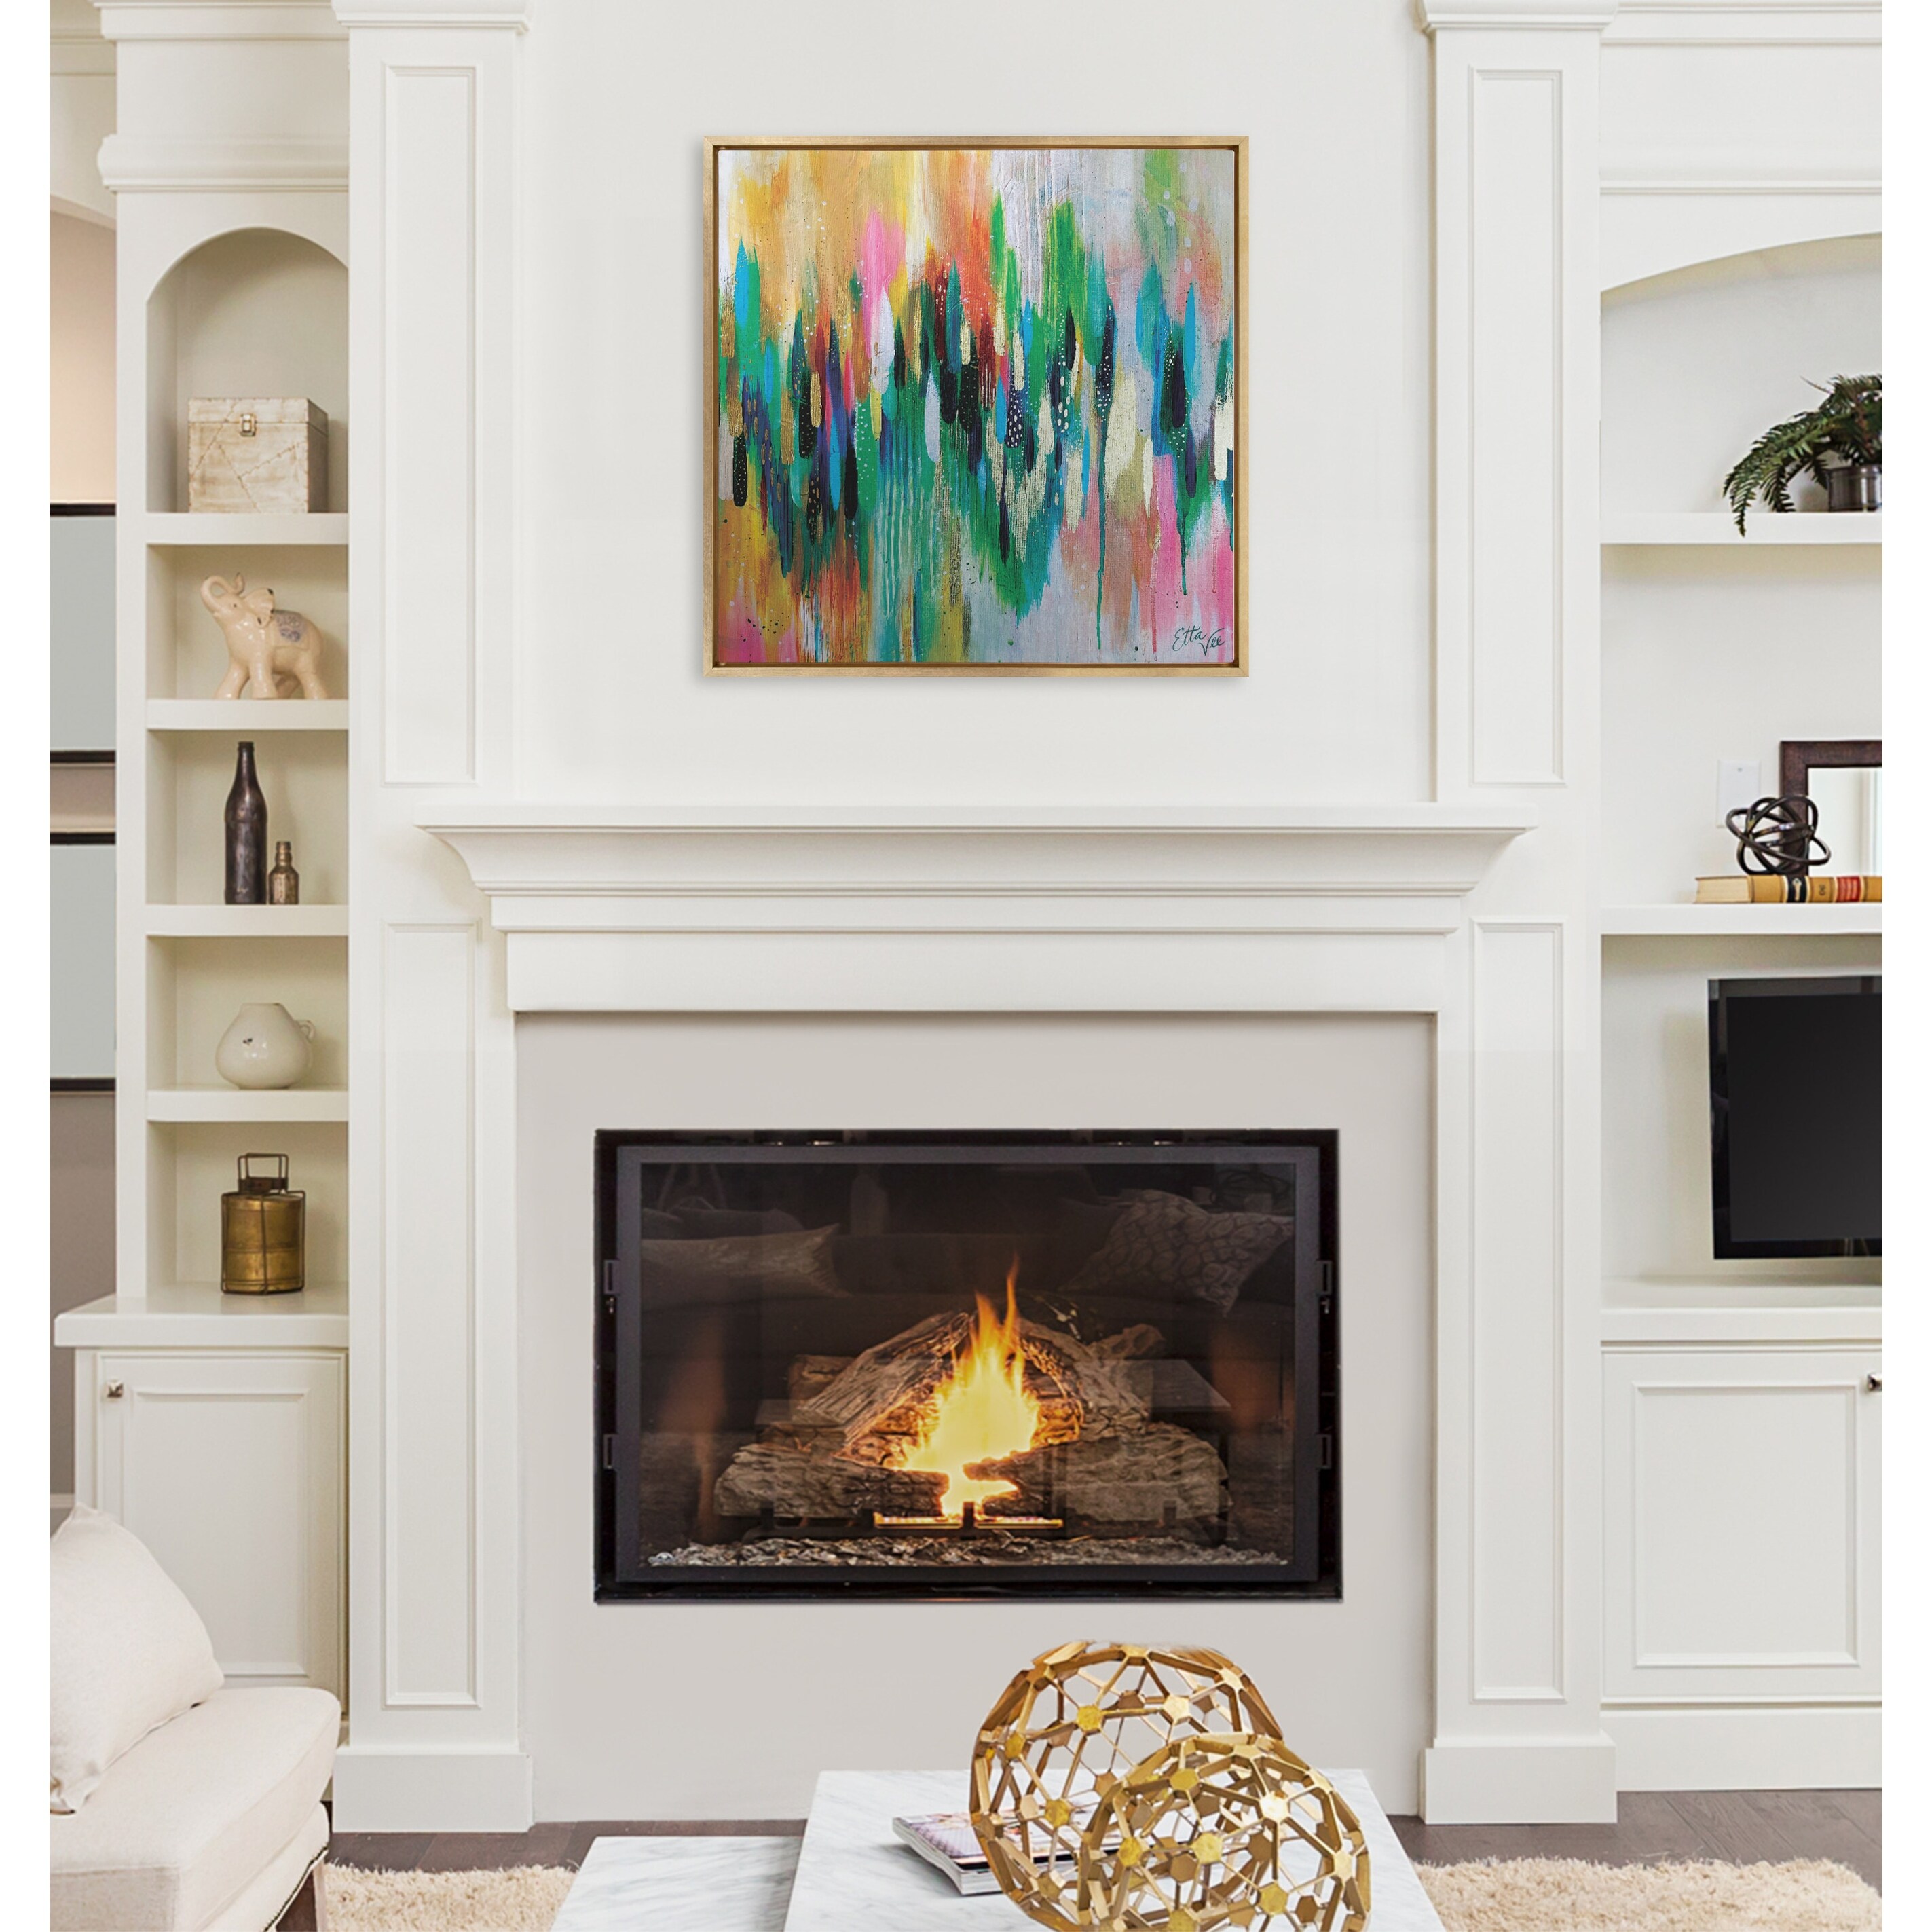 Kate and Laurel Sylvie Brushstroke 100 , Bright Abstract and 2 Framed  Canvas Wall Art Set by Jessi Raulet of Ettavee, 3 Piece Set, 16x20 and  23x33, Gold Frame, Colorful Striking Wall